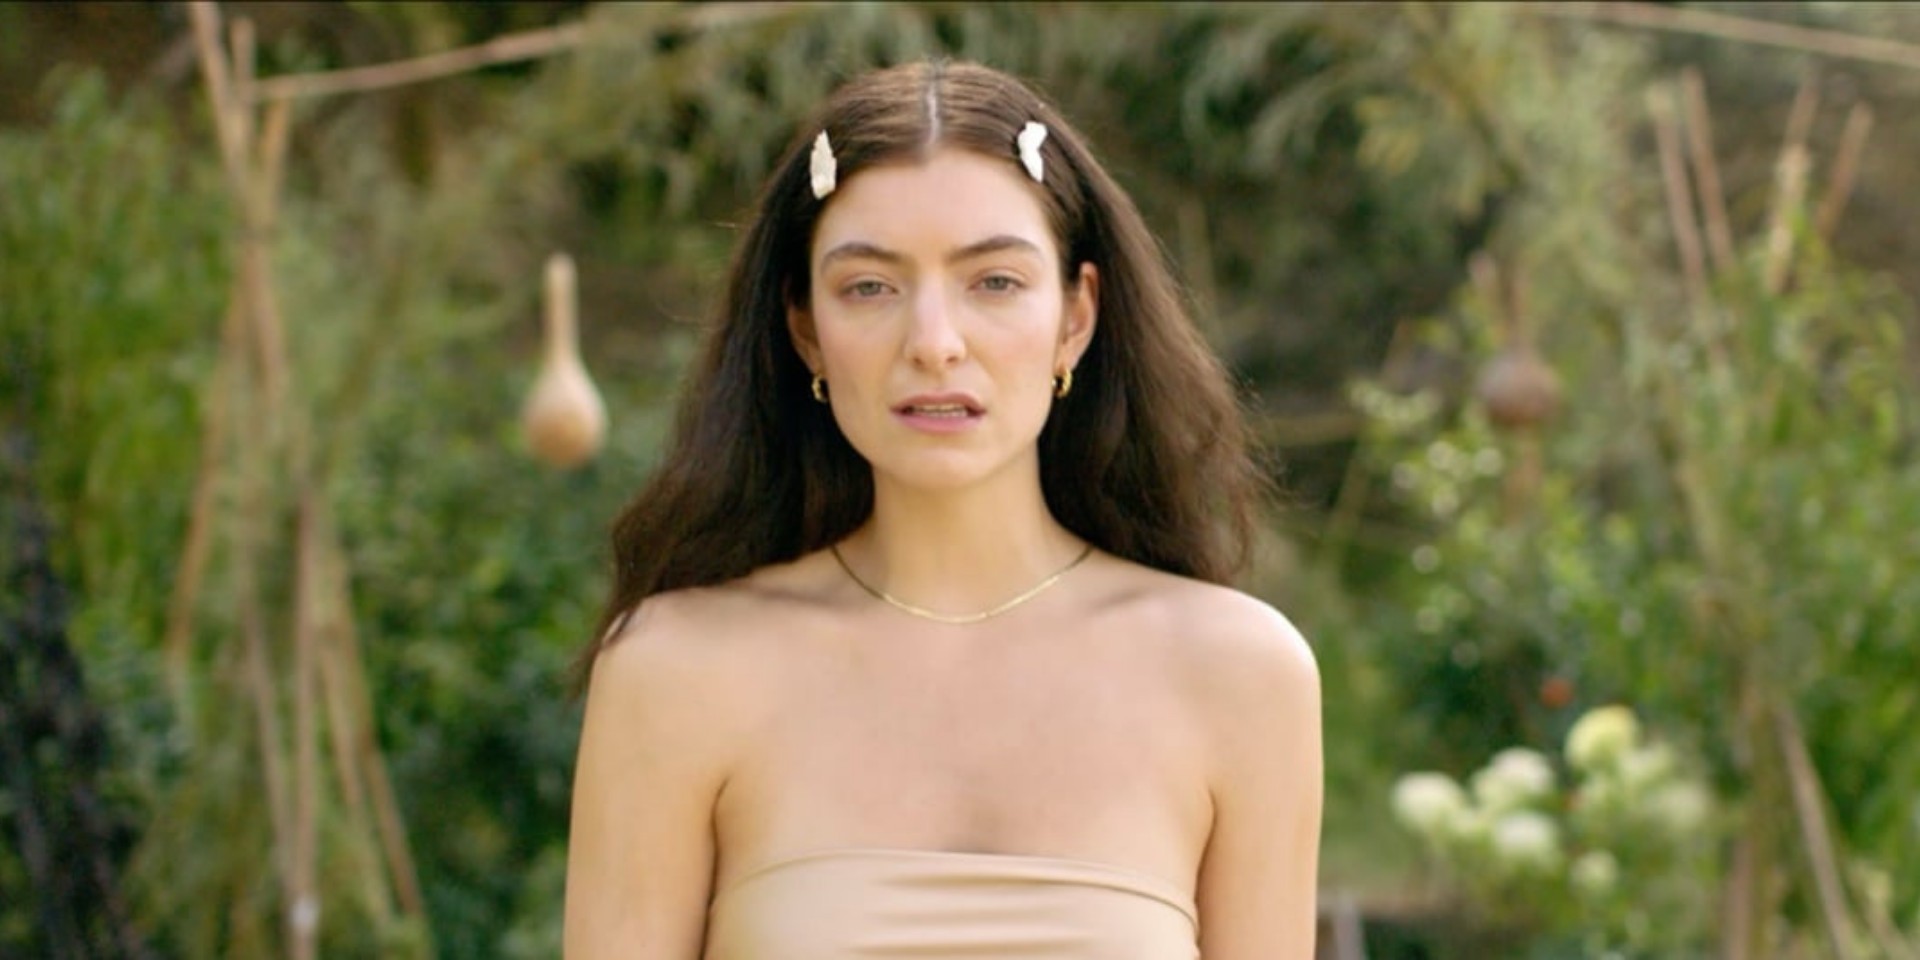 Lorde unveils deluxe version of 'Solar Power' with new songs 'Helen of Troy' and 'Hold No Grudge' – listen